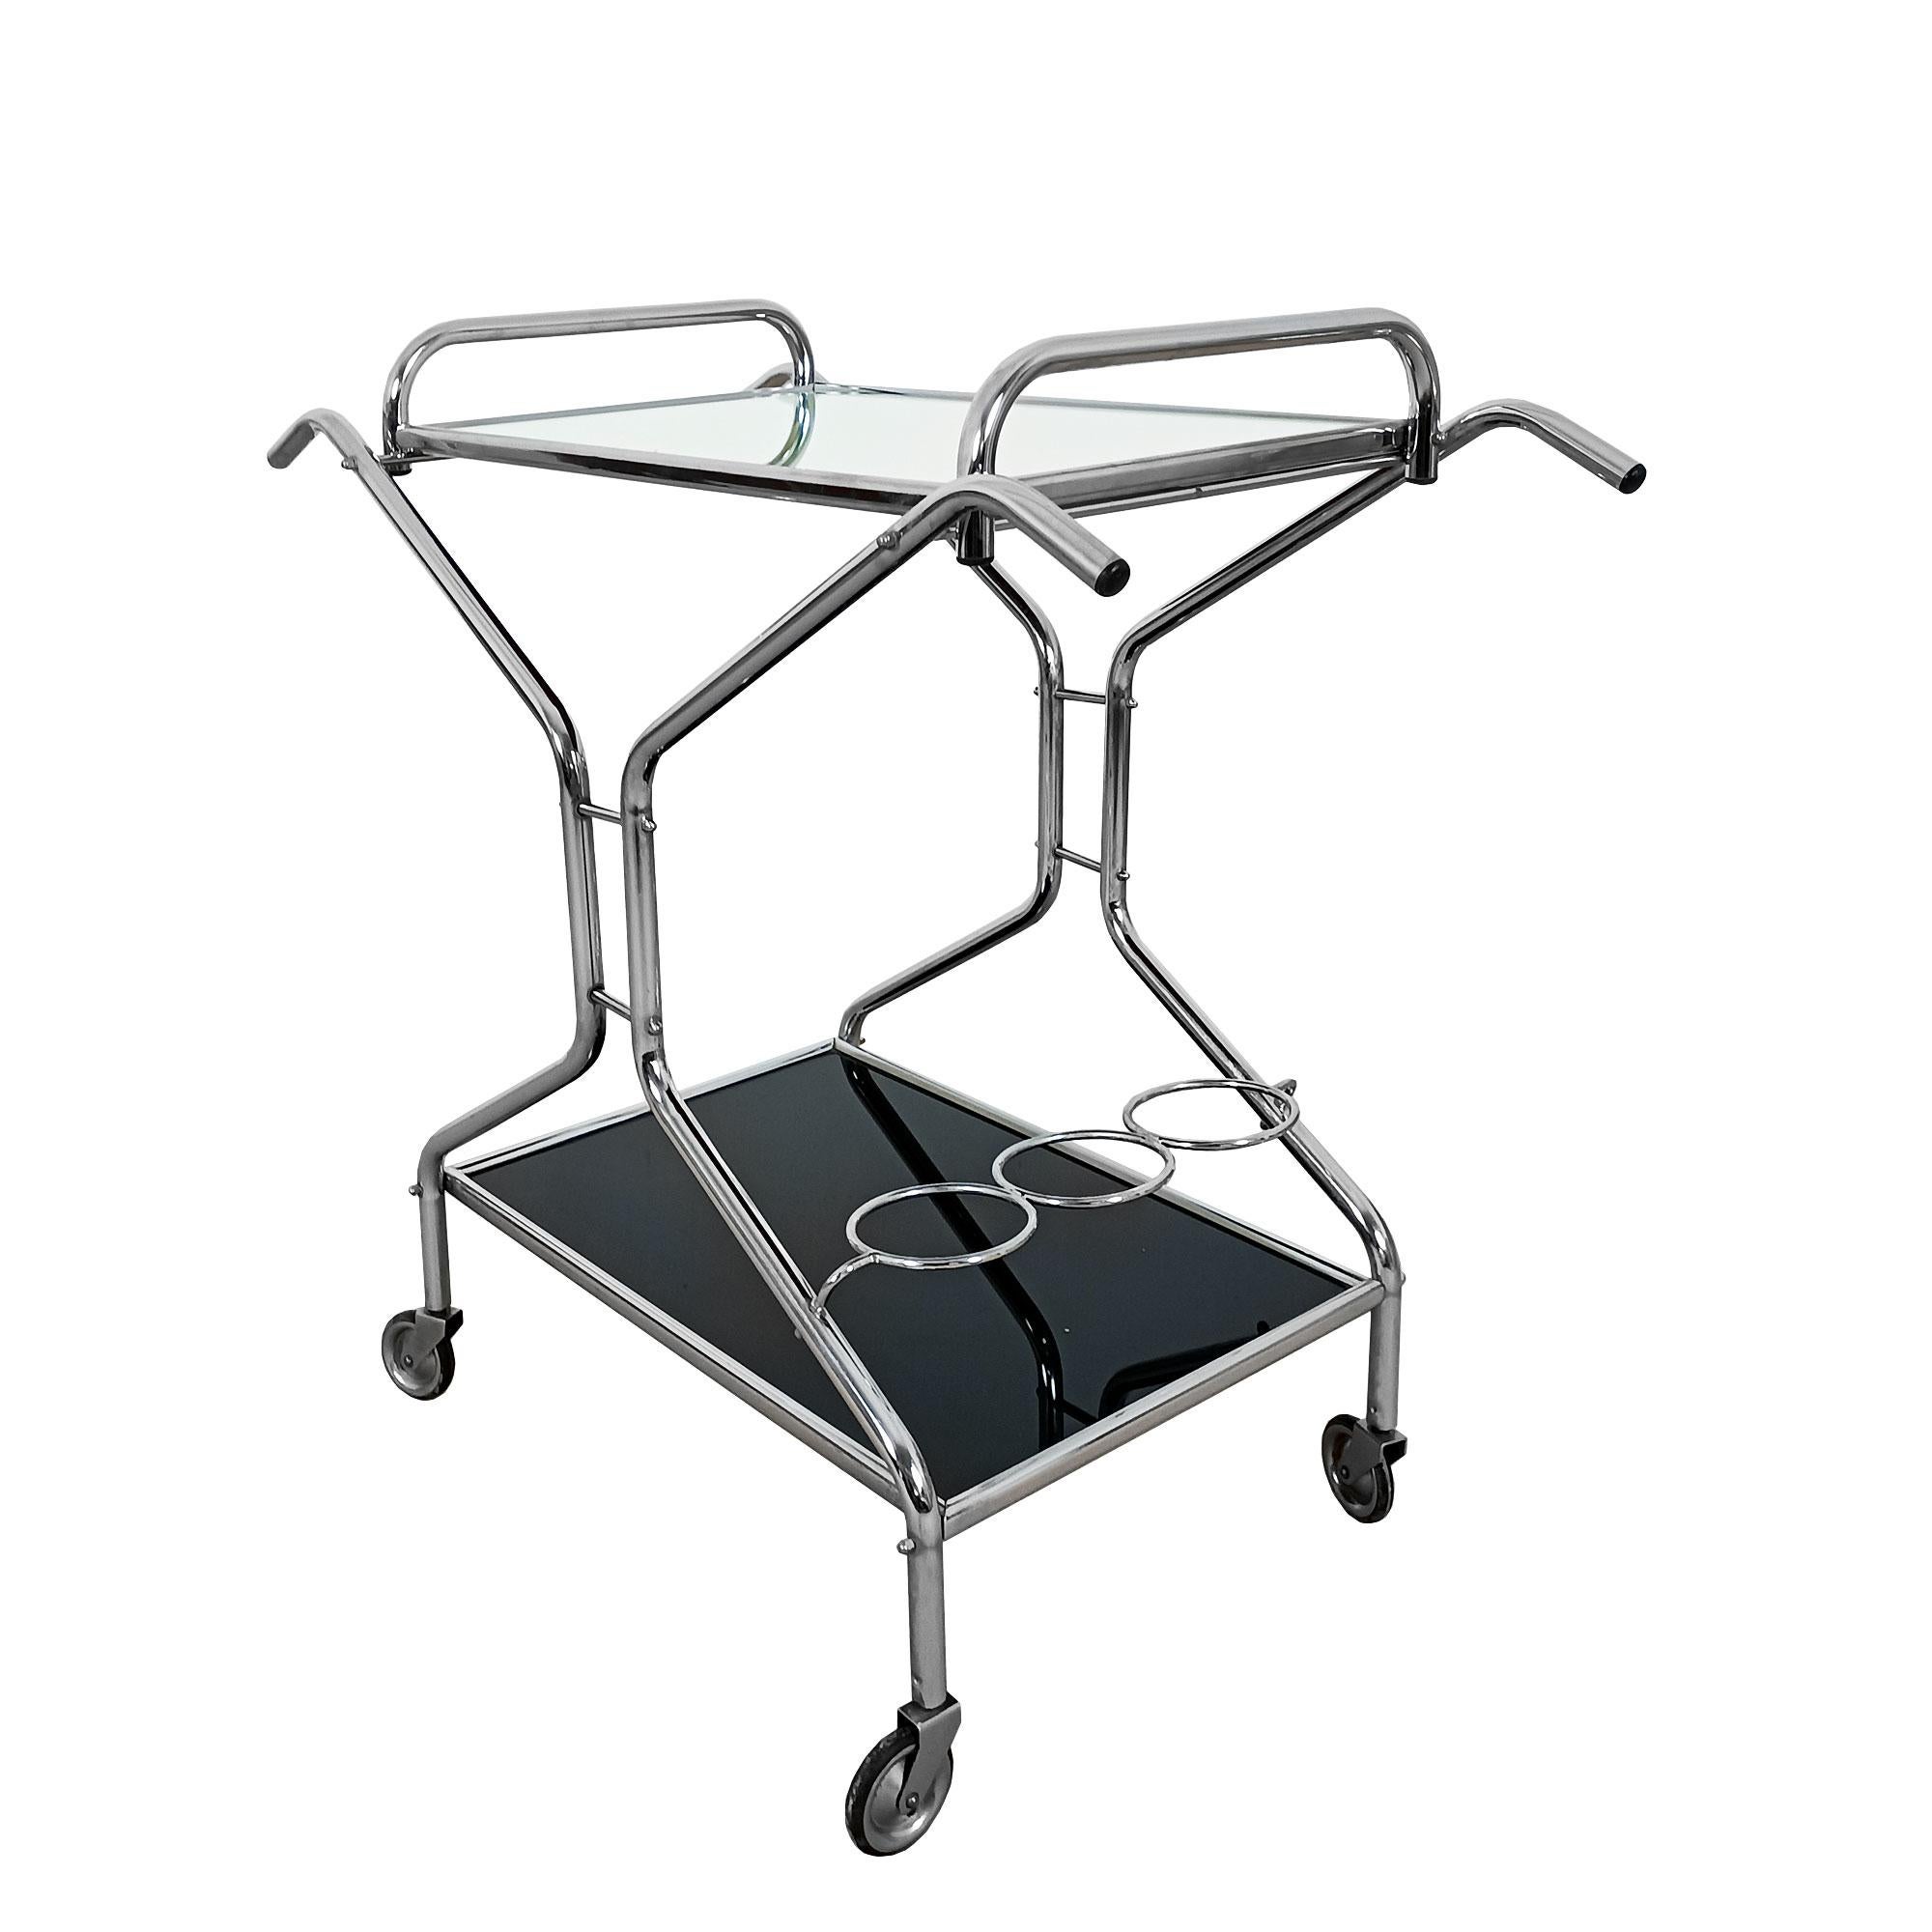 Nickel-plated metal serving trolley, black opaline base, removable upper tray covered with a mirror.

France circa 1950

Dimensions

Total 
cm 81 x 41,5 x 76,5
inches 31.89 x 16.34 x 30.12

Tray
cm 60 x 35,5 x 10
inches 23.62 x 13.98 x 3.93